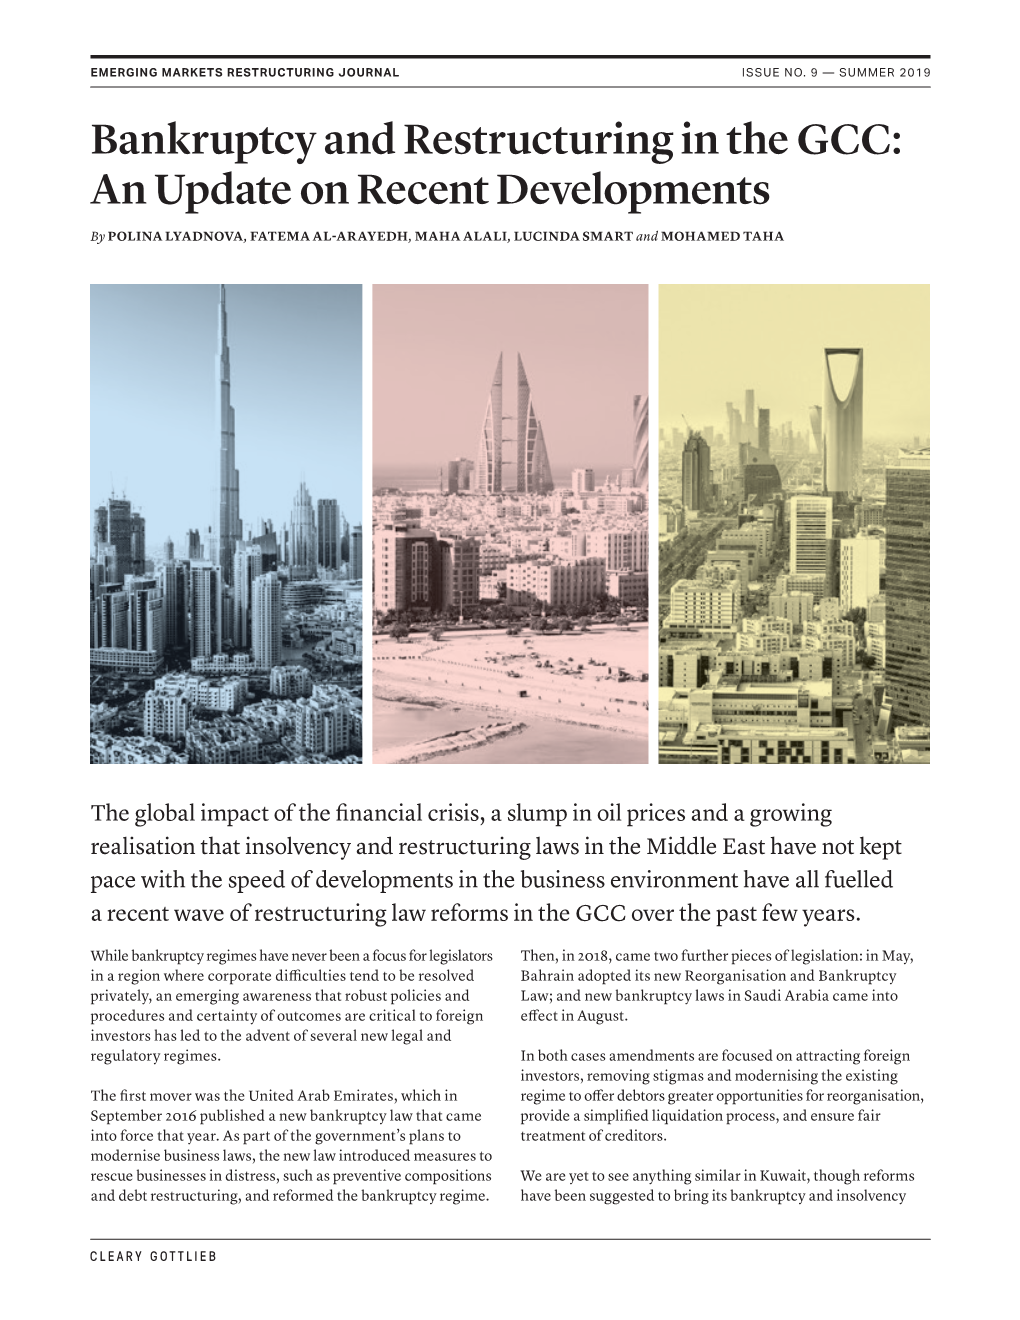 Bankruptcy and Restructuring in the GCC: an Update on Recent Developments